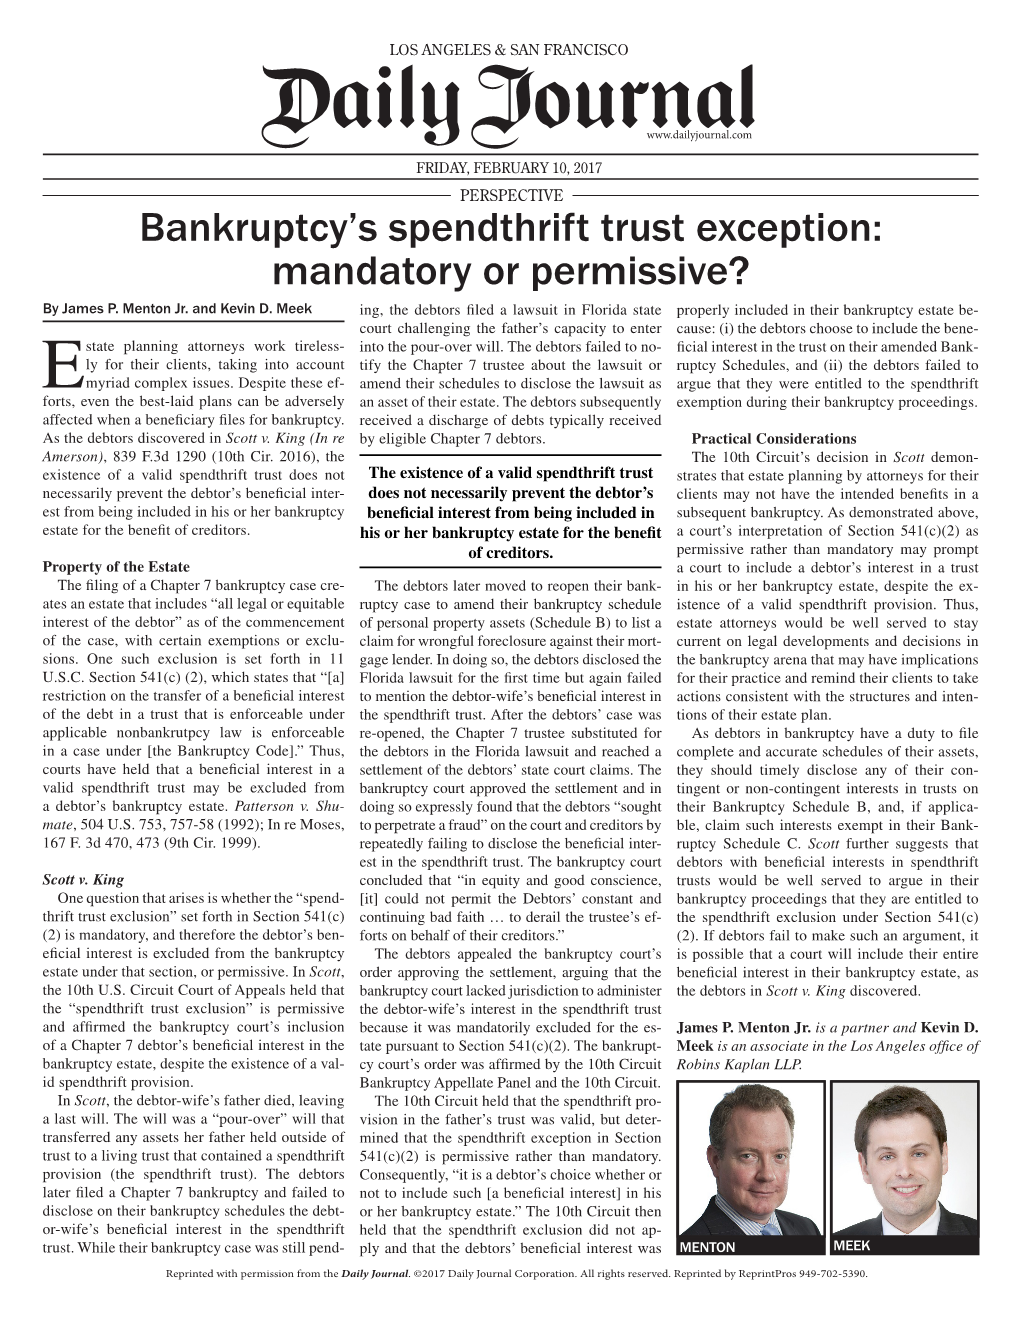 Bankruptcy's Spendthrift Trust Exception